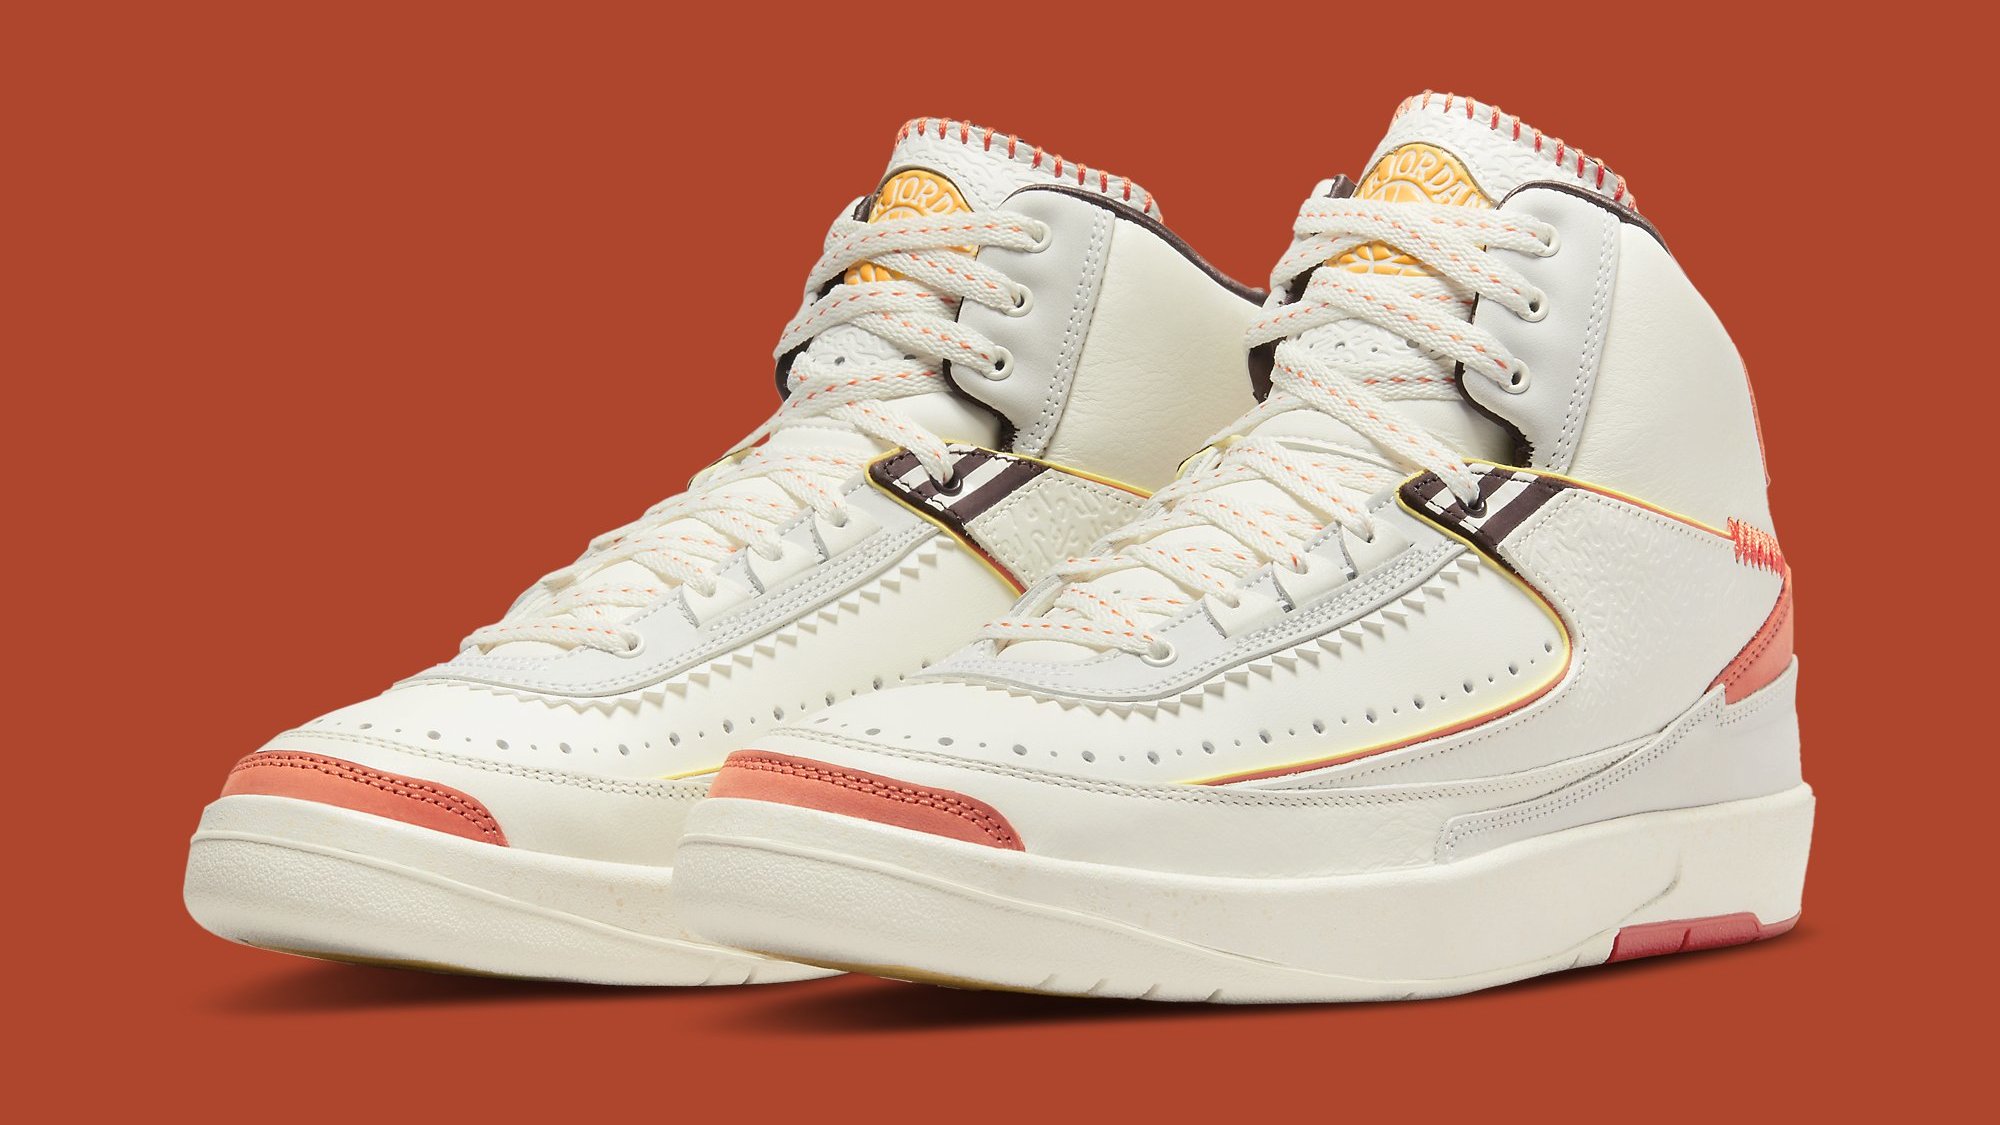 Maison Chateau Rouge's Air Jordan 2 Collab Is Releasing in June